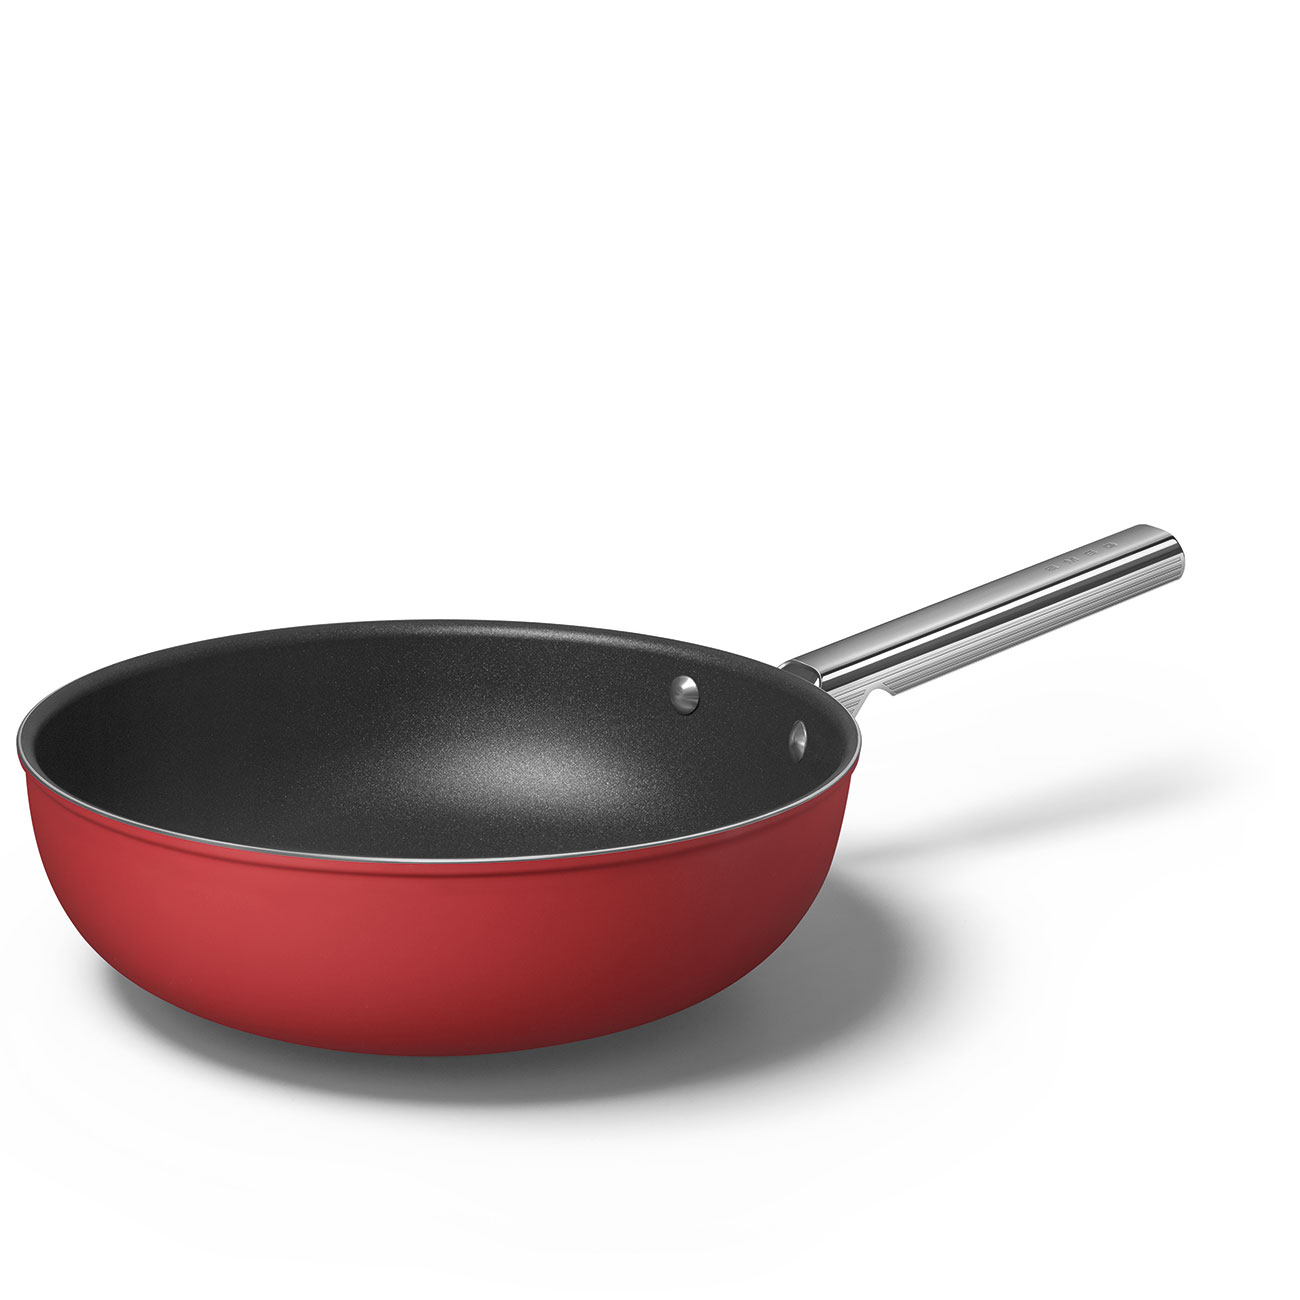 Smeg Red Non-stick Wok with Stainless Steel Handle - CKFW3001RDM_7